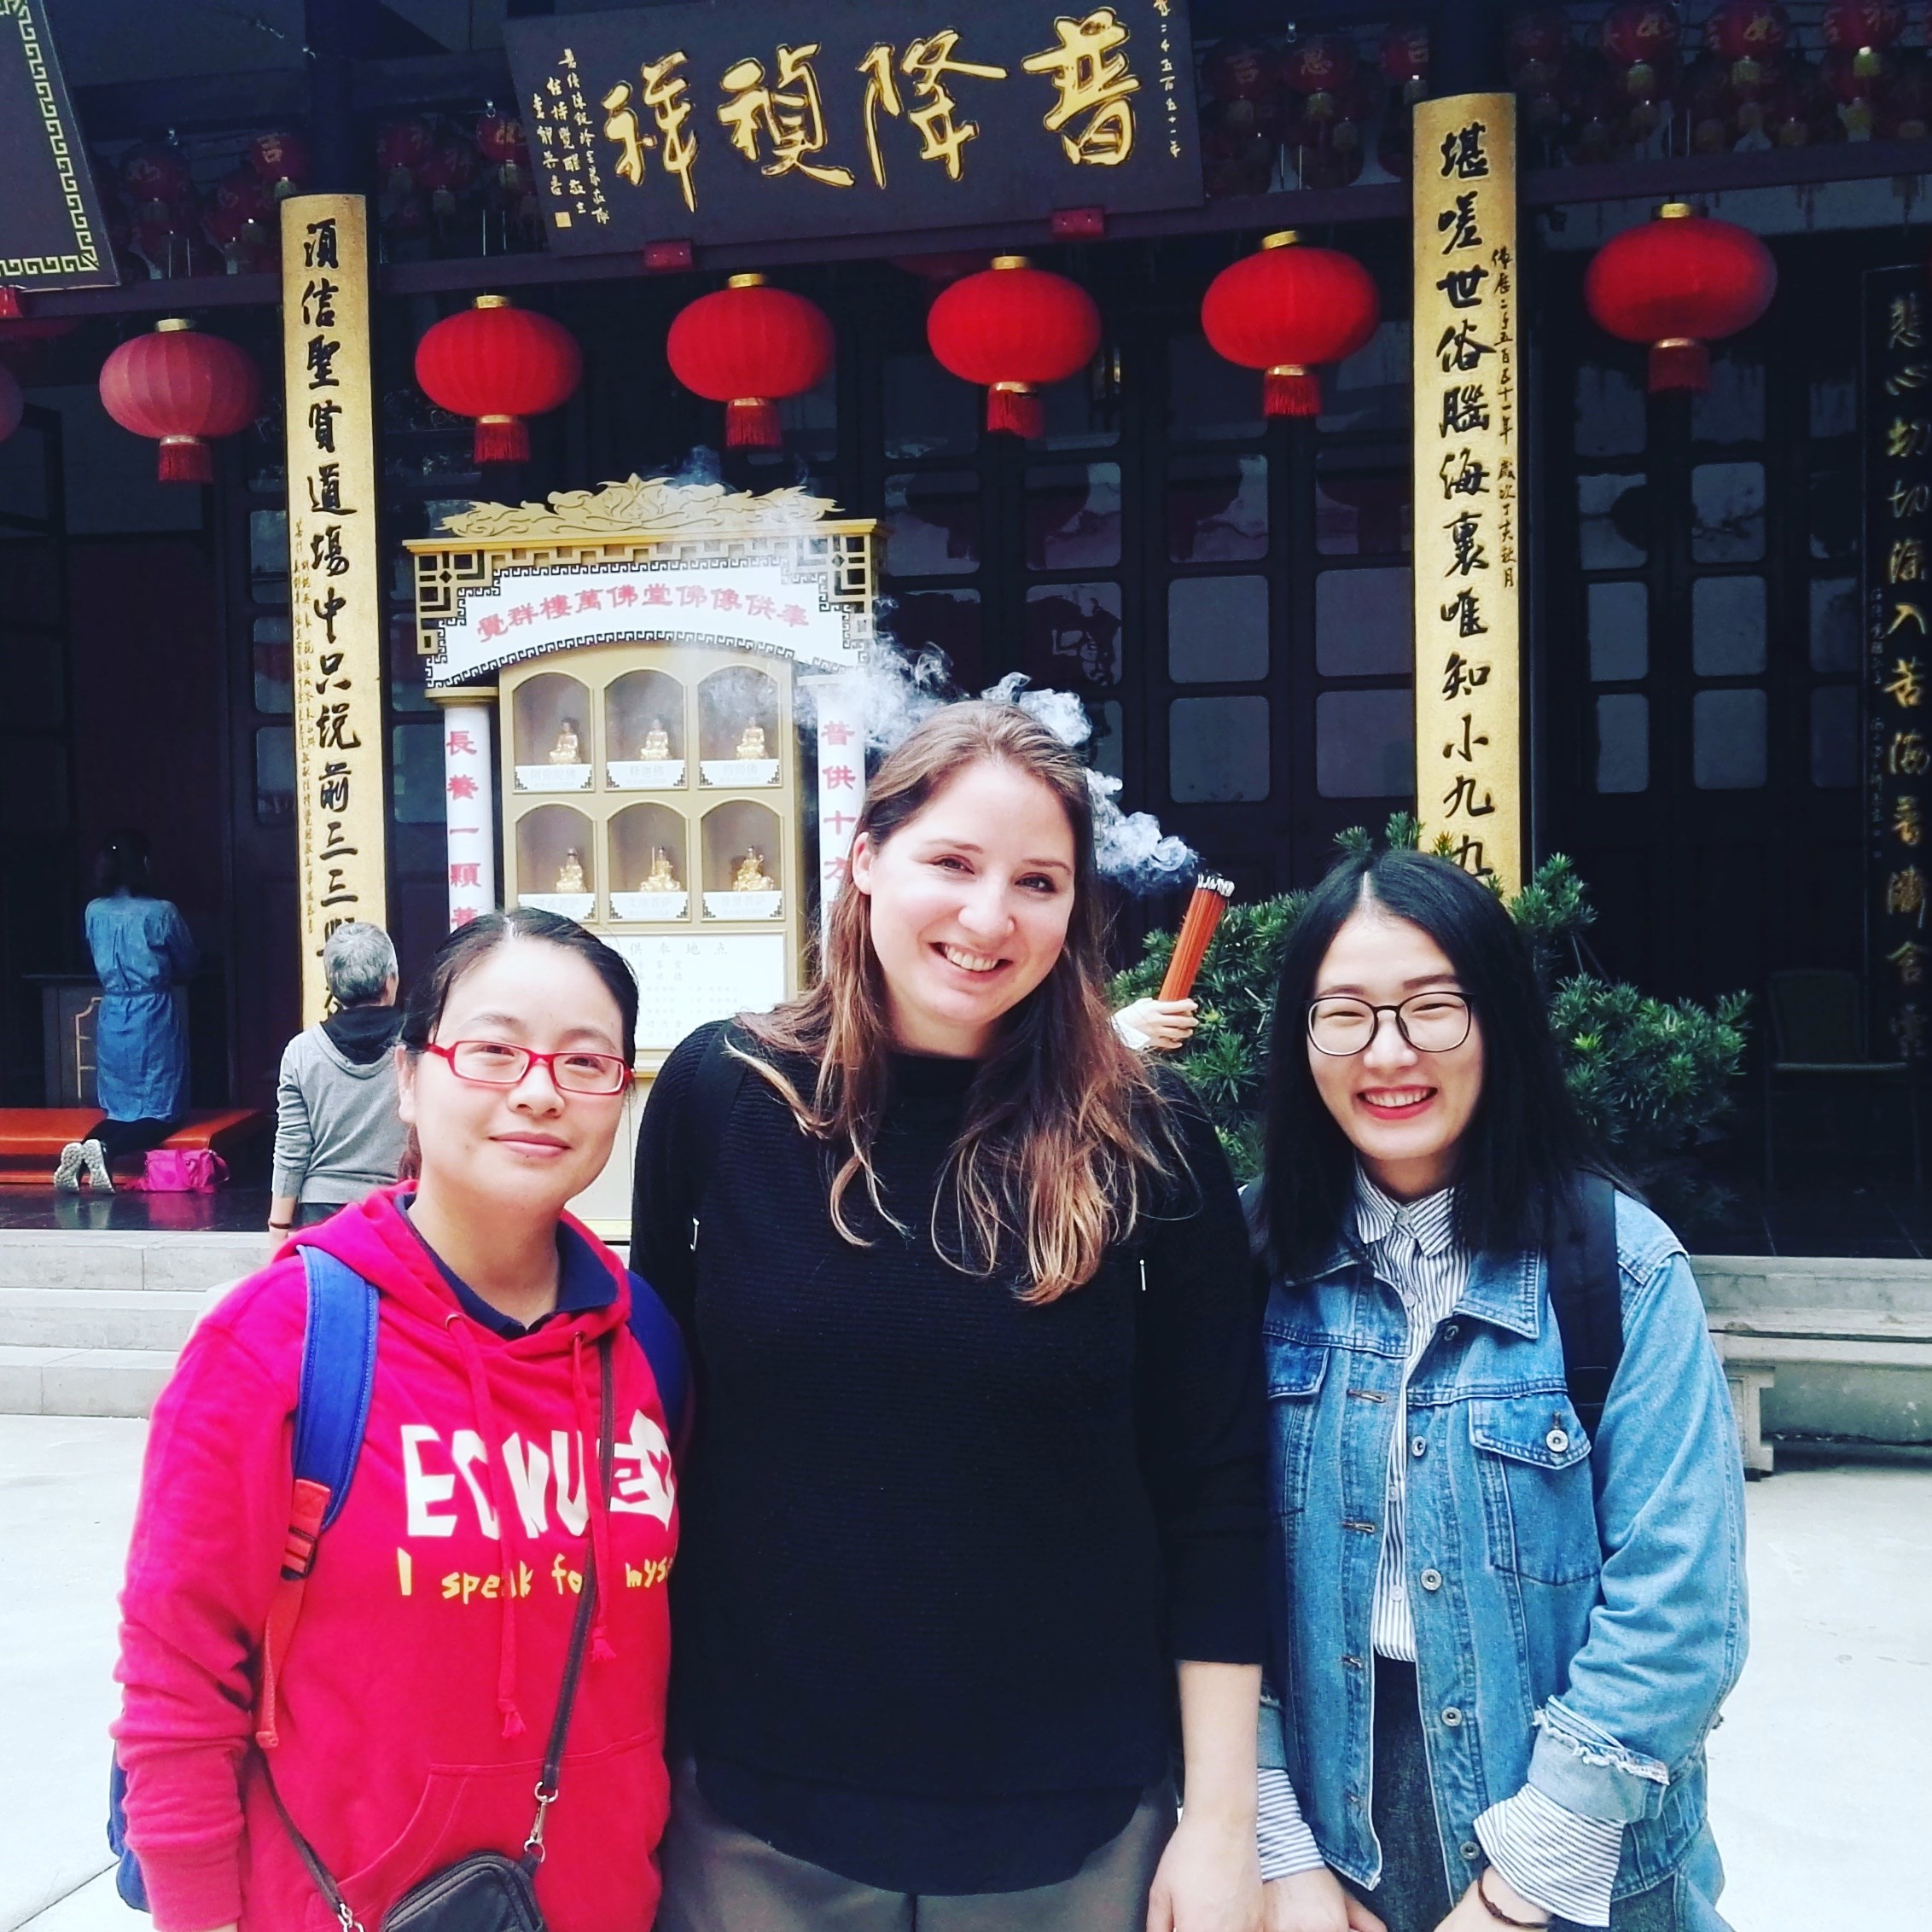 PhD student Ranveig Falch in Shanghai, China